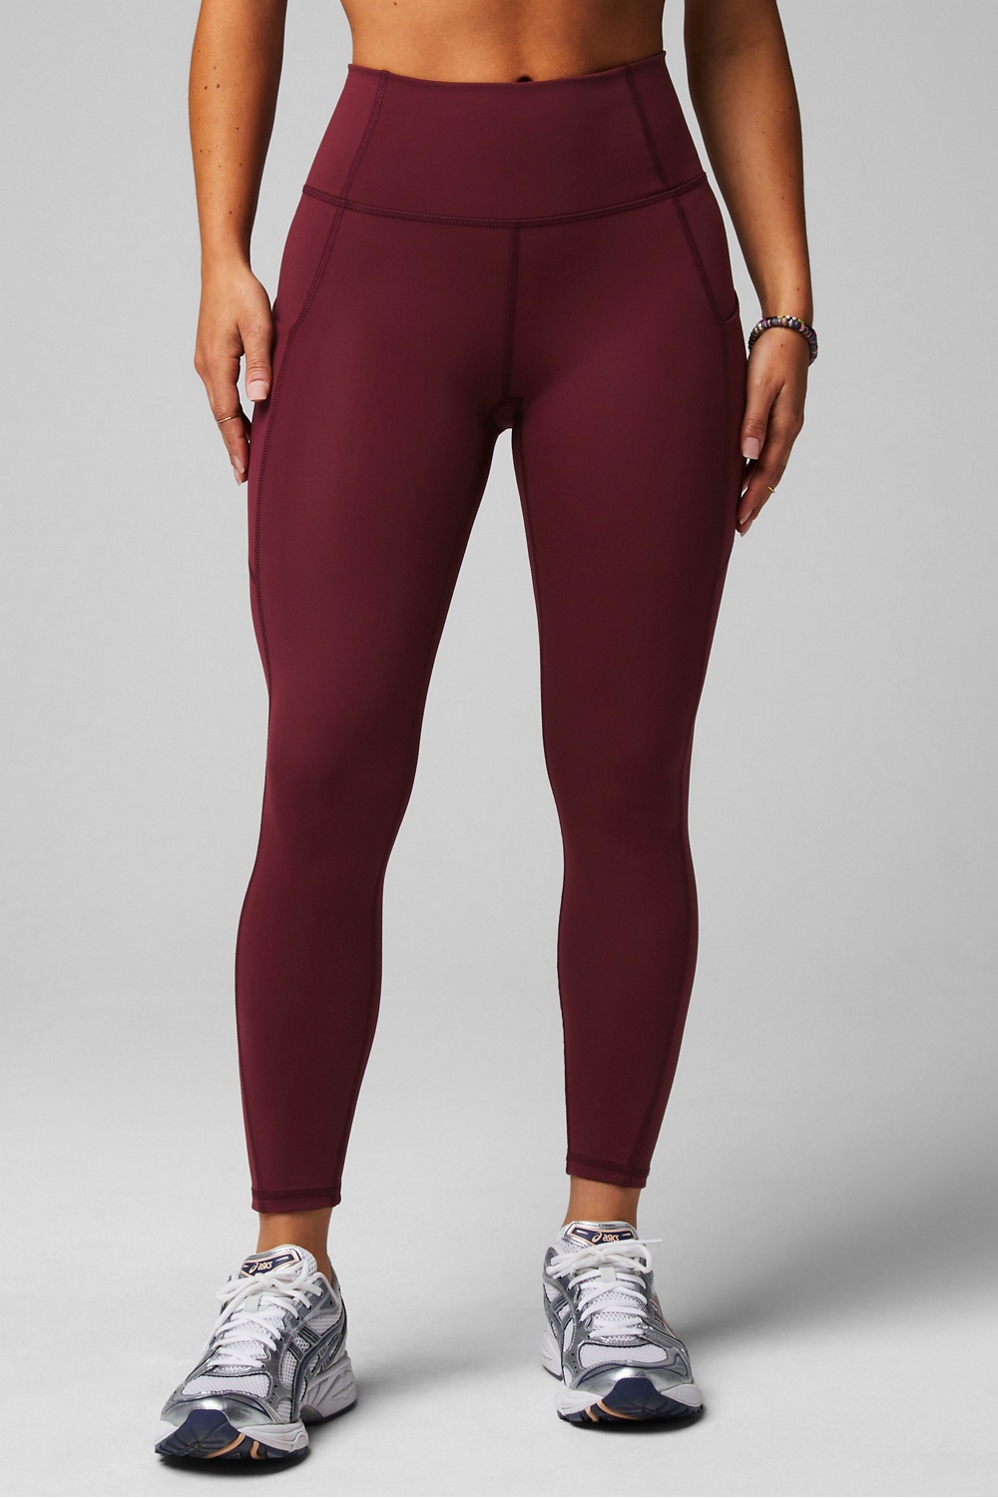 Fabletics Oasis Pureluxe High-Waisted 7/8 Legging Blue Size XS - $25 (54%  Off Retail) - From lily